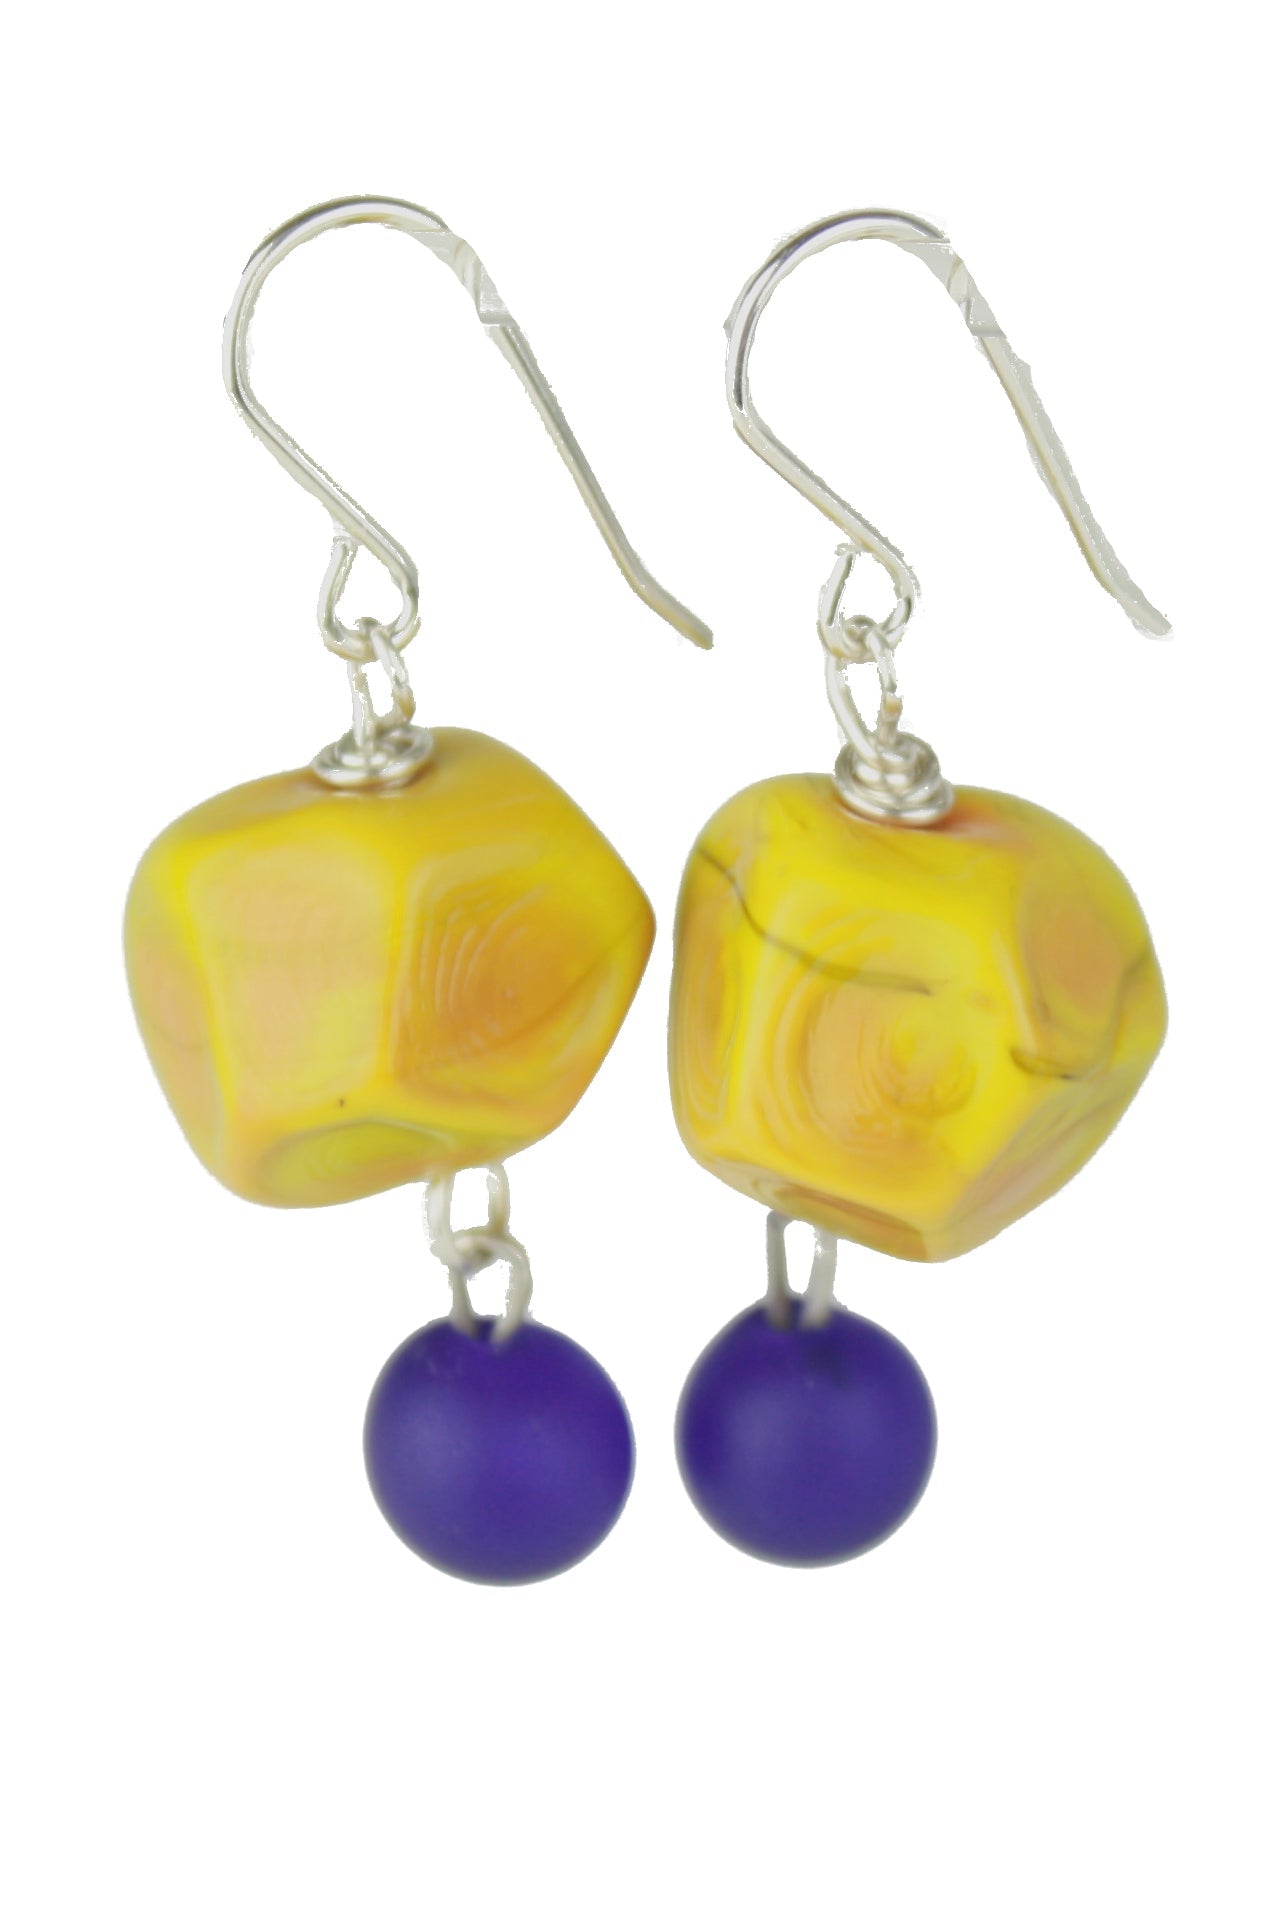 Nugget earrings featuring hand crafted ochre yellow glass hand faceted beads with a small cobalt blue glass charm